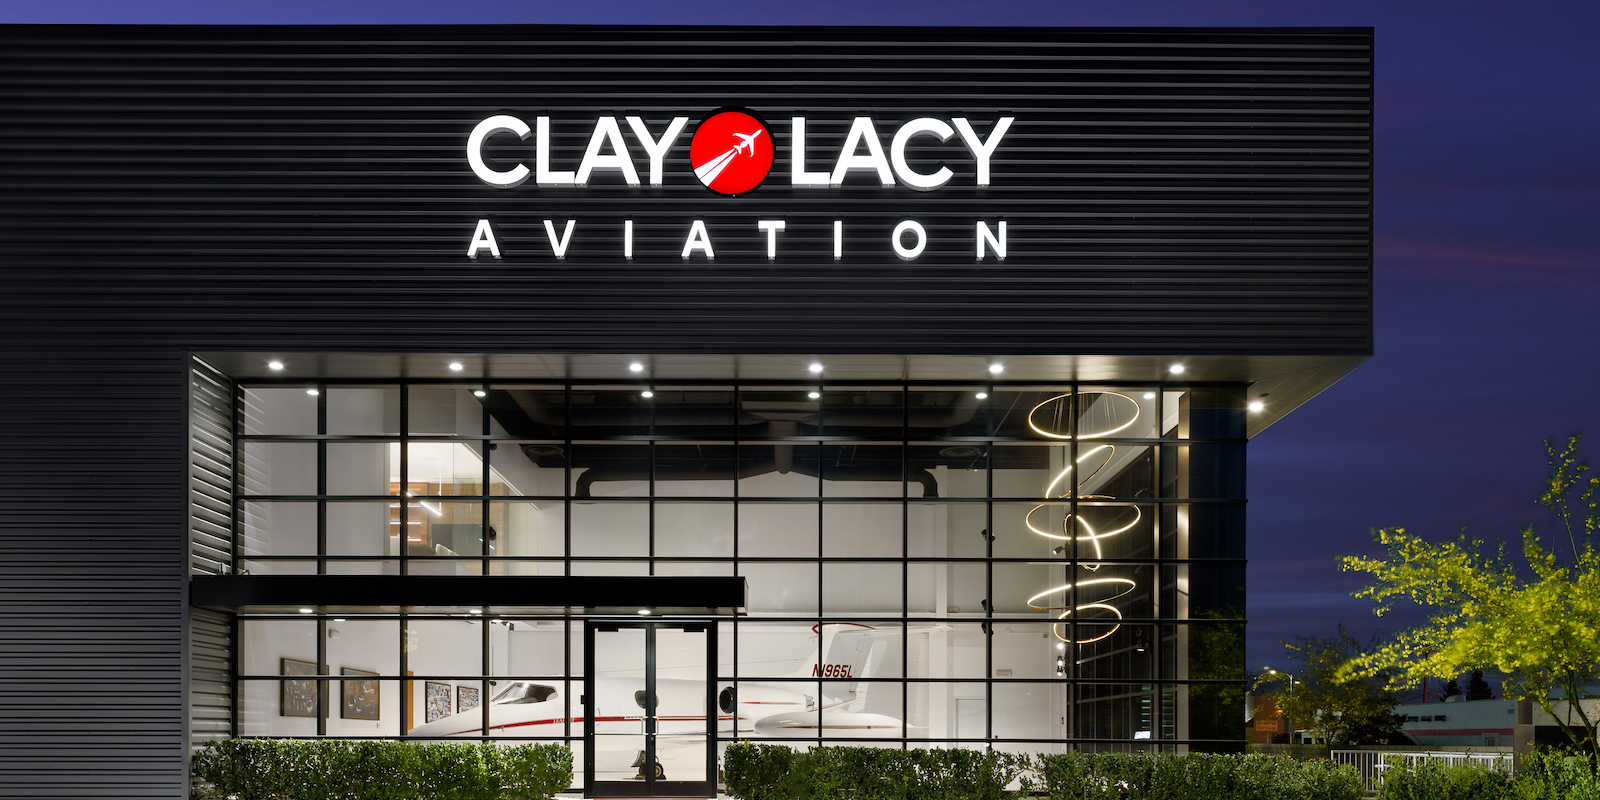 Clay Lacy Aviation Names Greteman Group Agency of Record